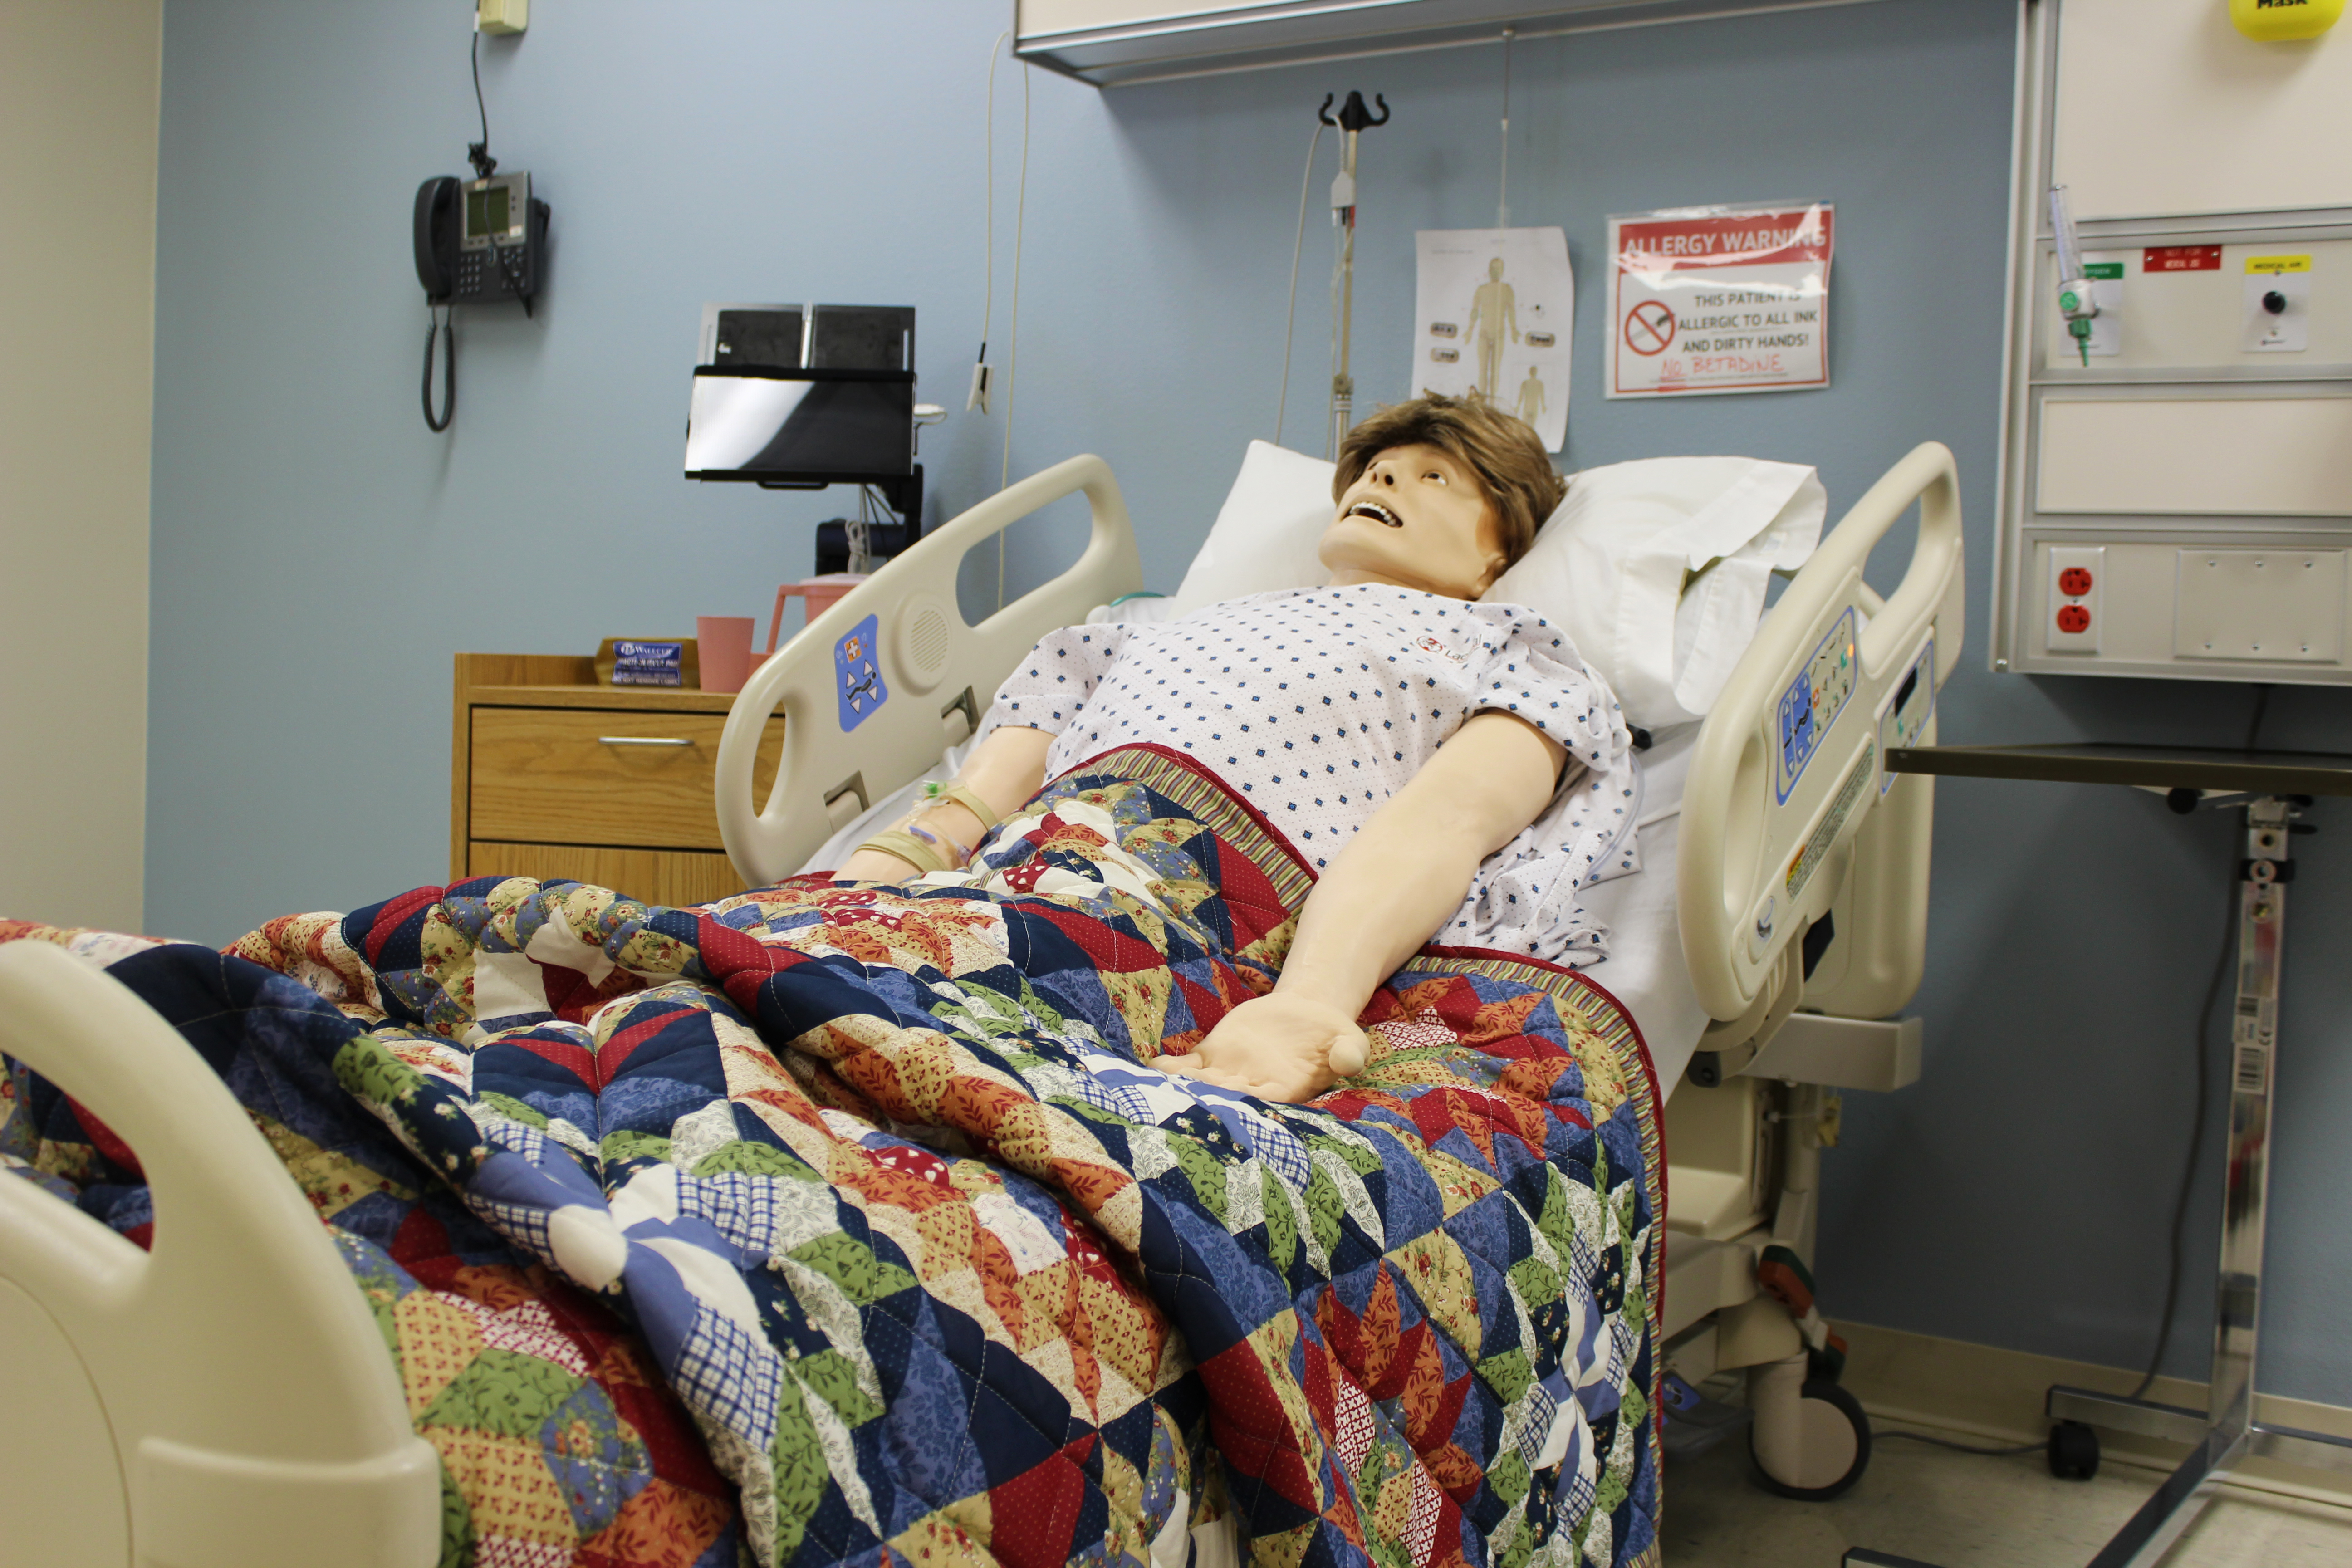 Simulation Center helps students learn by failing safely